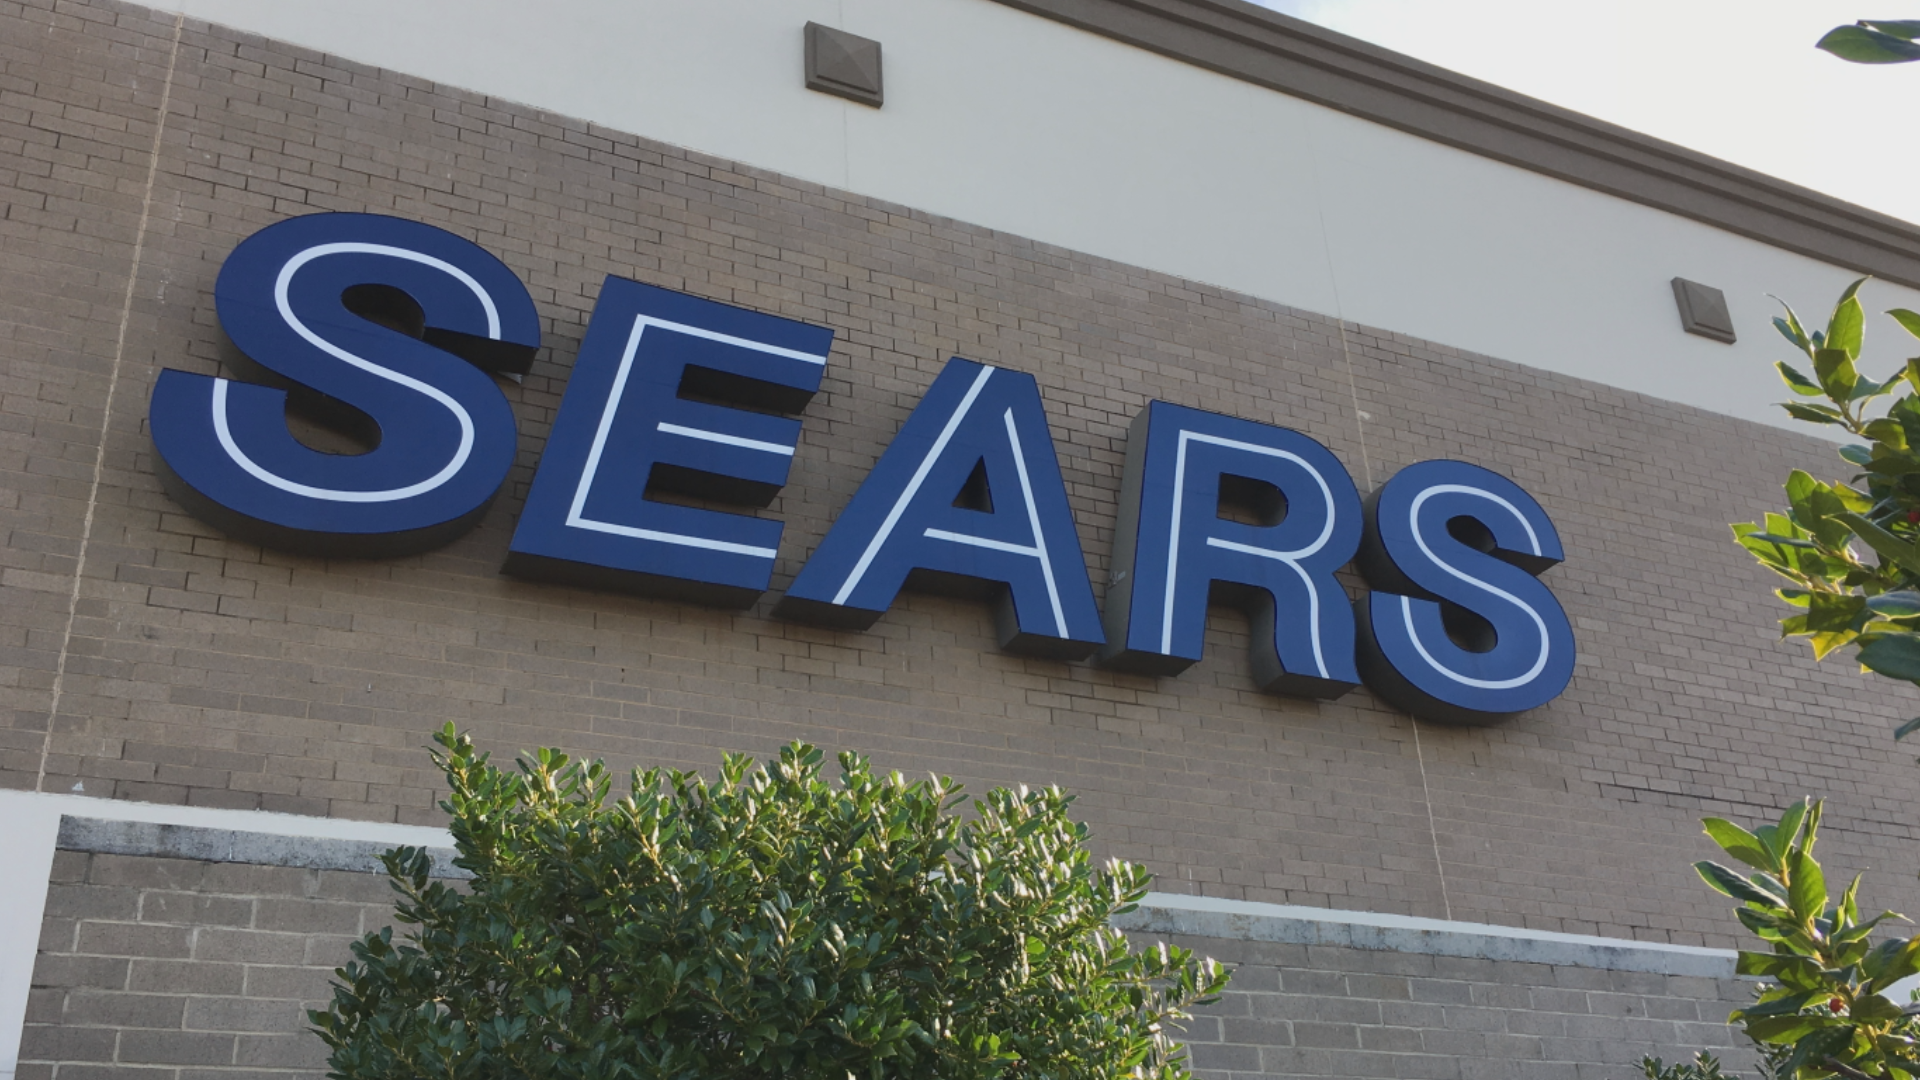 Sears will close 142 stores, including Kmart locations, by the end of the year. Two in our area will close: the Sears at West Town Mall and the Kmart on Maynardville Pike.